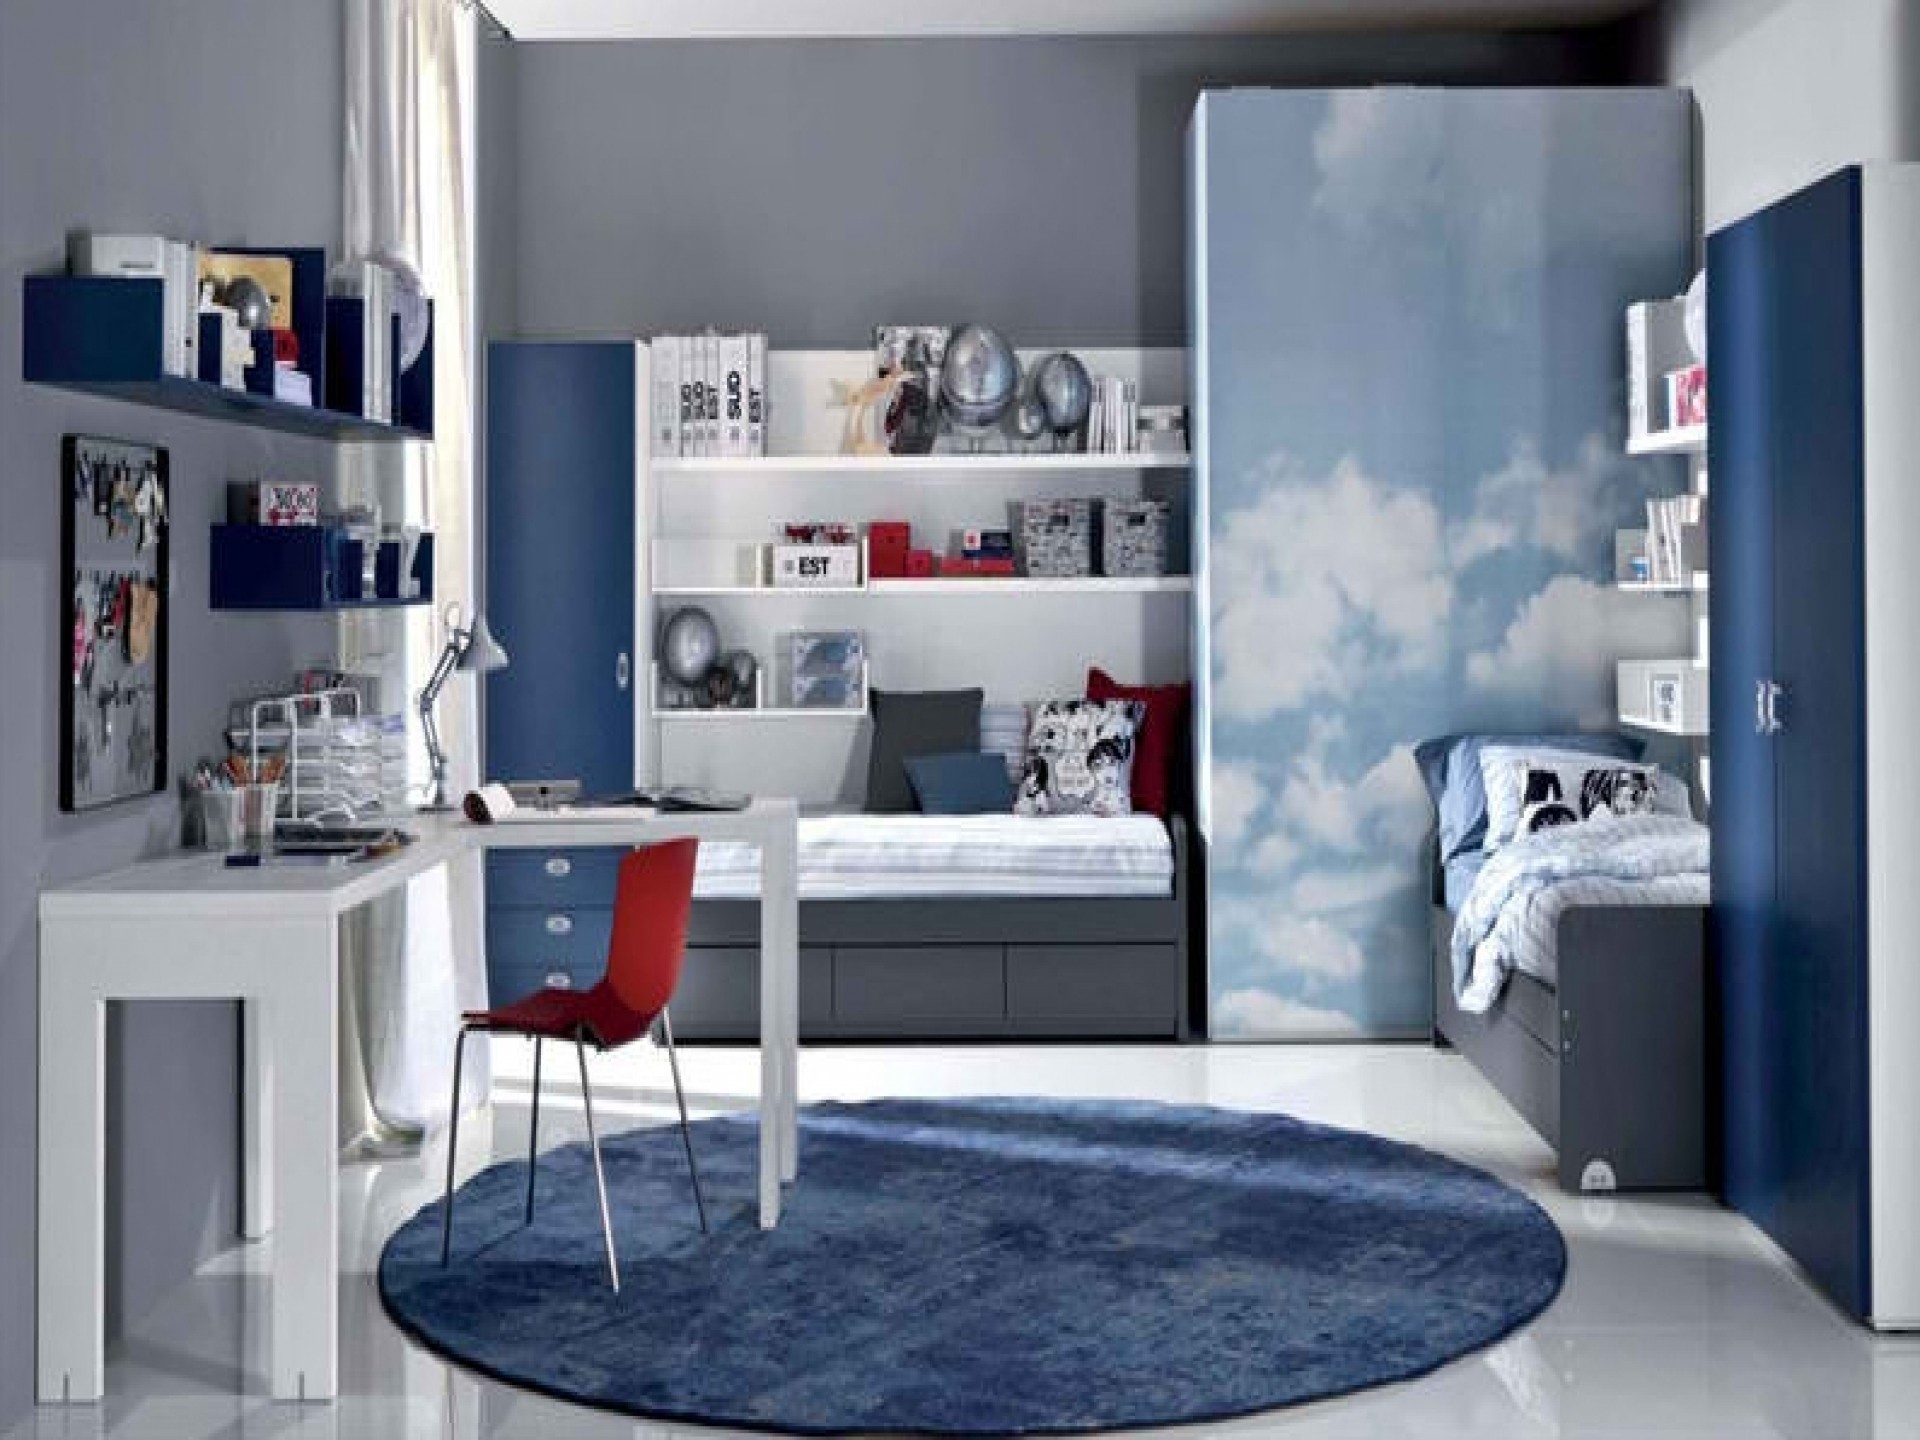 1920x1440 Exciting Teen Bedroom Ideas Room Decor For Teenage Design With Attractive  Contemporary Boys Bedrooms Fresh In ...